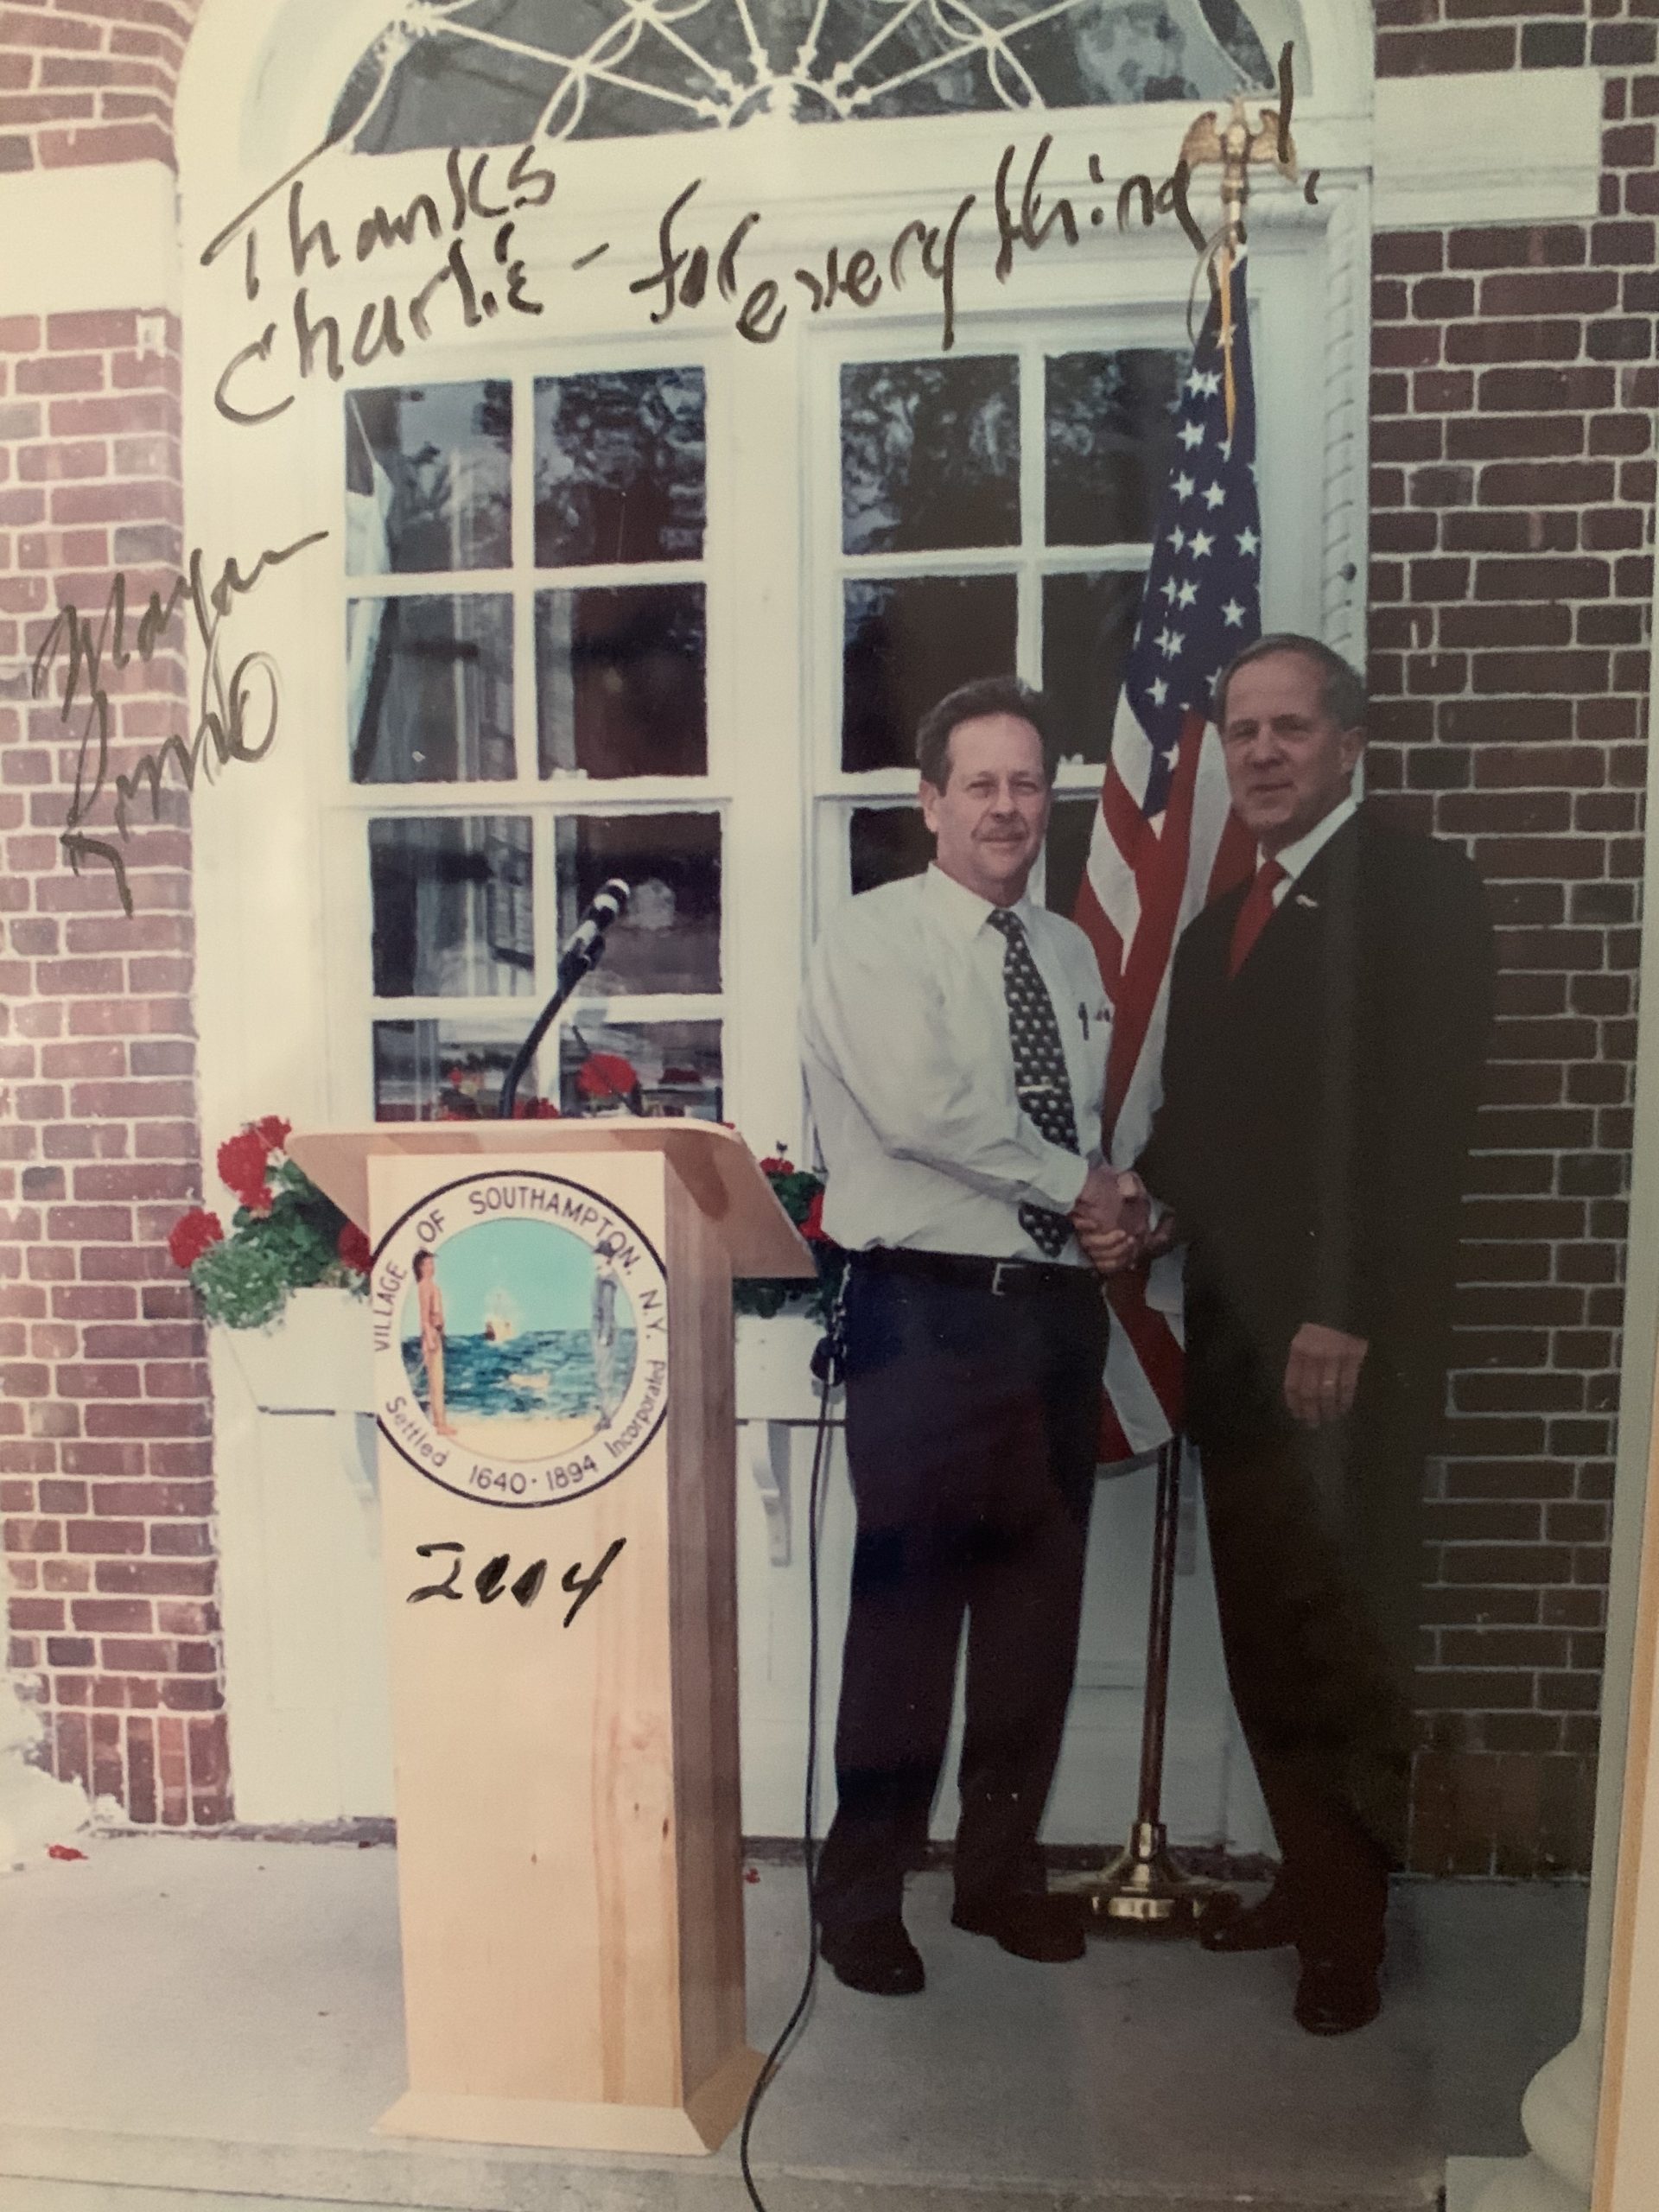 Charles Styler and former Southampton Village Mayor Joseph P. Romanosky Jr., who, together, started the local television station for governmental and educational programing, which is now known as SeaTV.